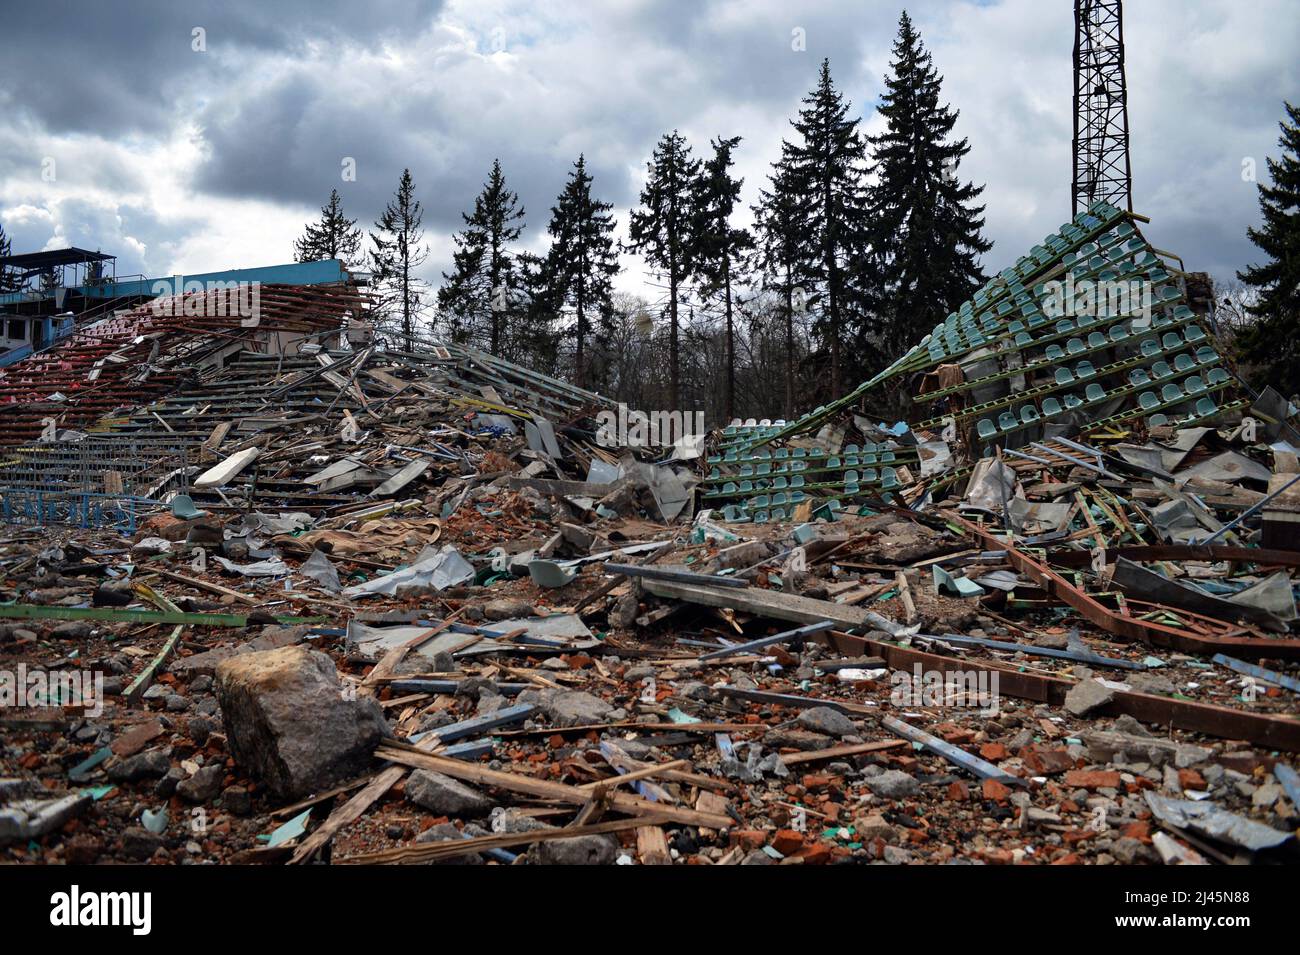 CHERNIHIV, UKRAINE - APRIL 11, 2022 - The damaged rows of seats are pictured on the stands of the Chernihiv Olympic Sports Training Centre (formerly Y Stock Photo